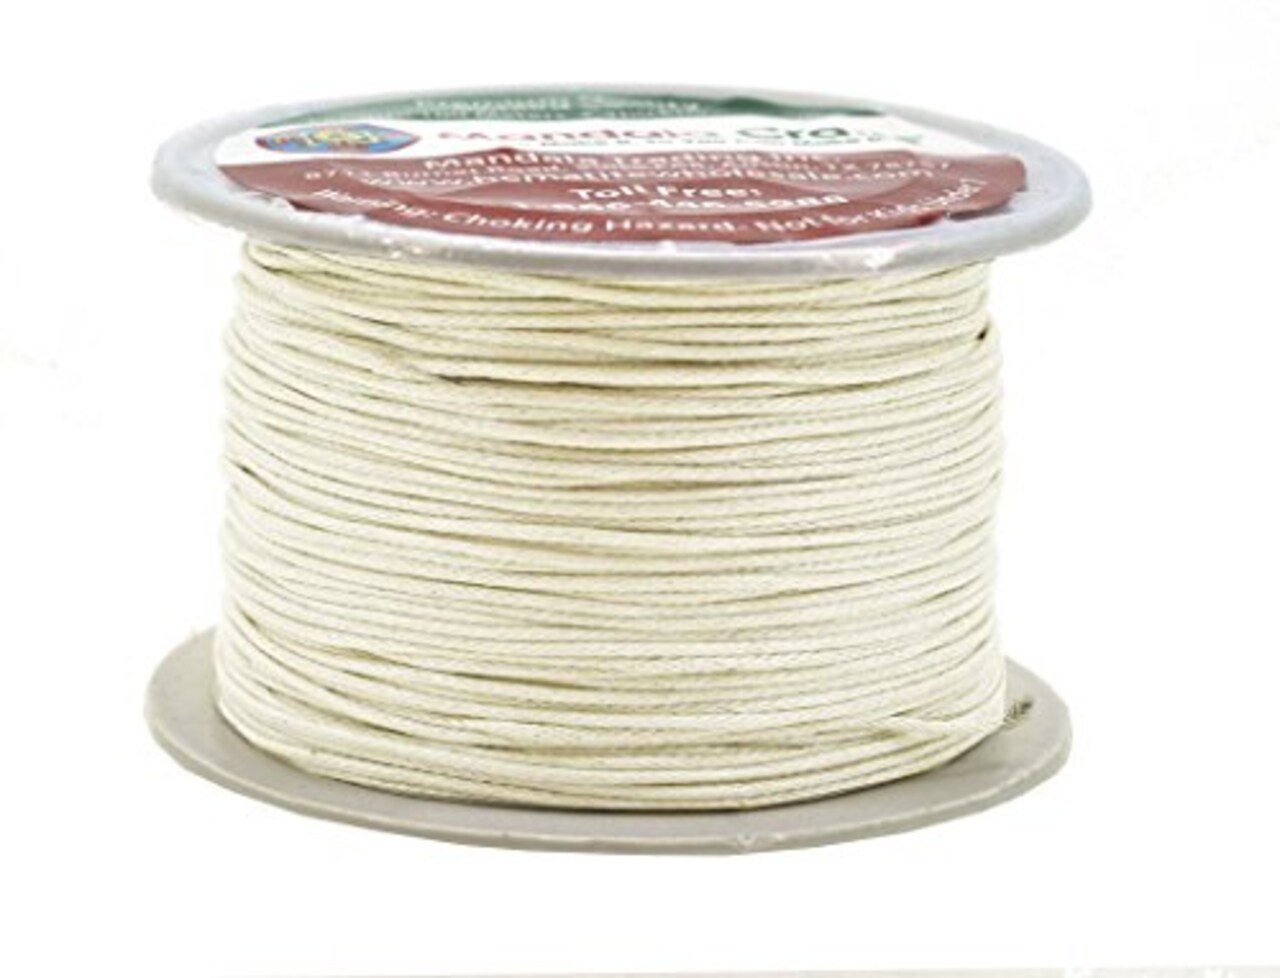 Mandala Crafts Cream 1mm Waxed Cord for Jewelry Making - 109 Yds Cream  Waxed Cotton Cord for Jewelry String Bracelet Cord Wax Cord Necklace String